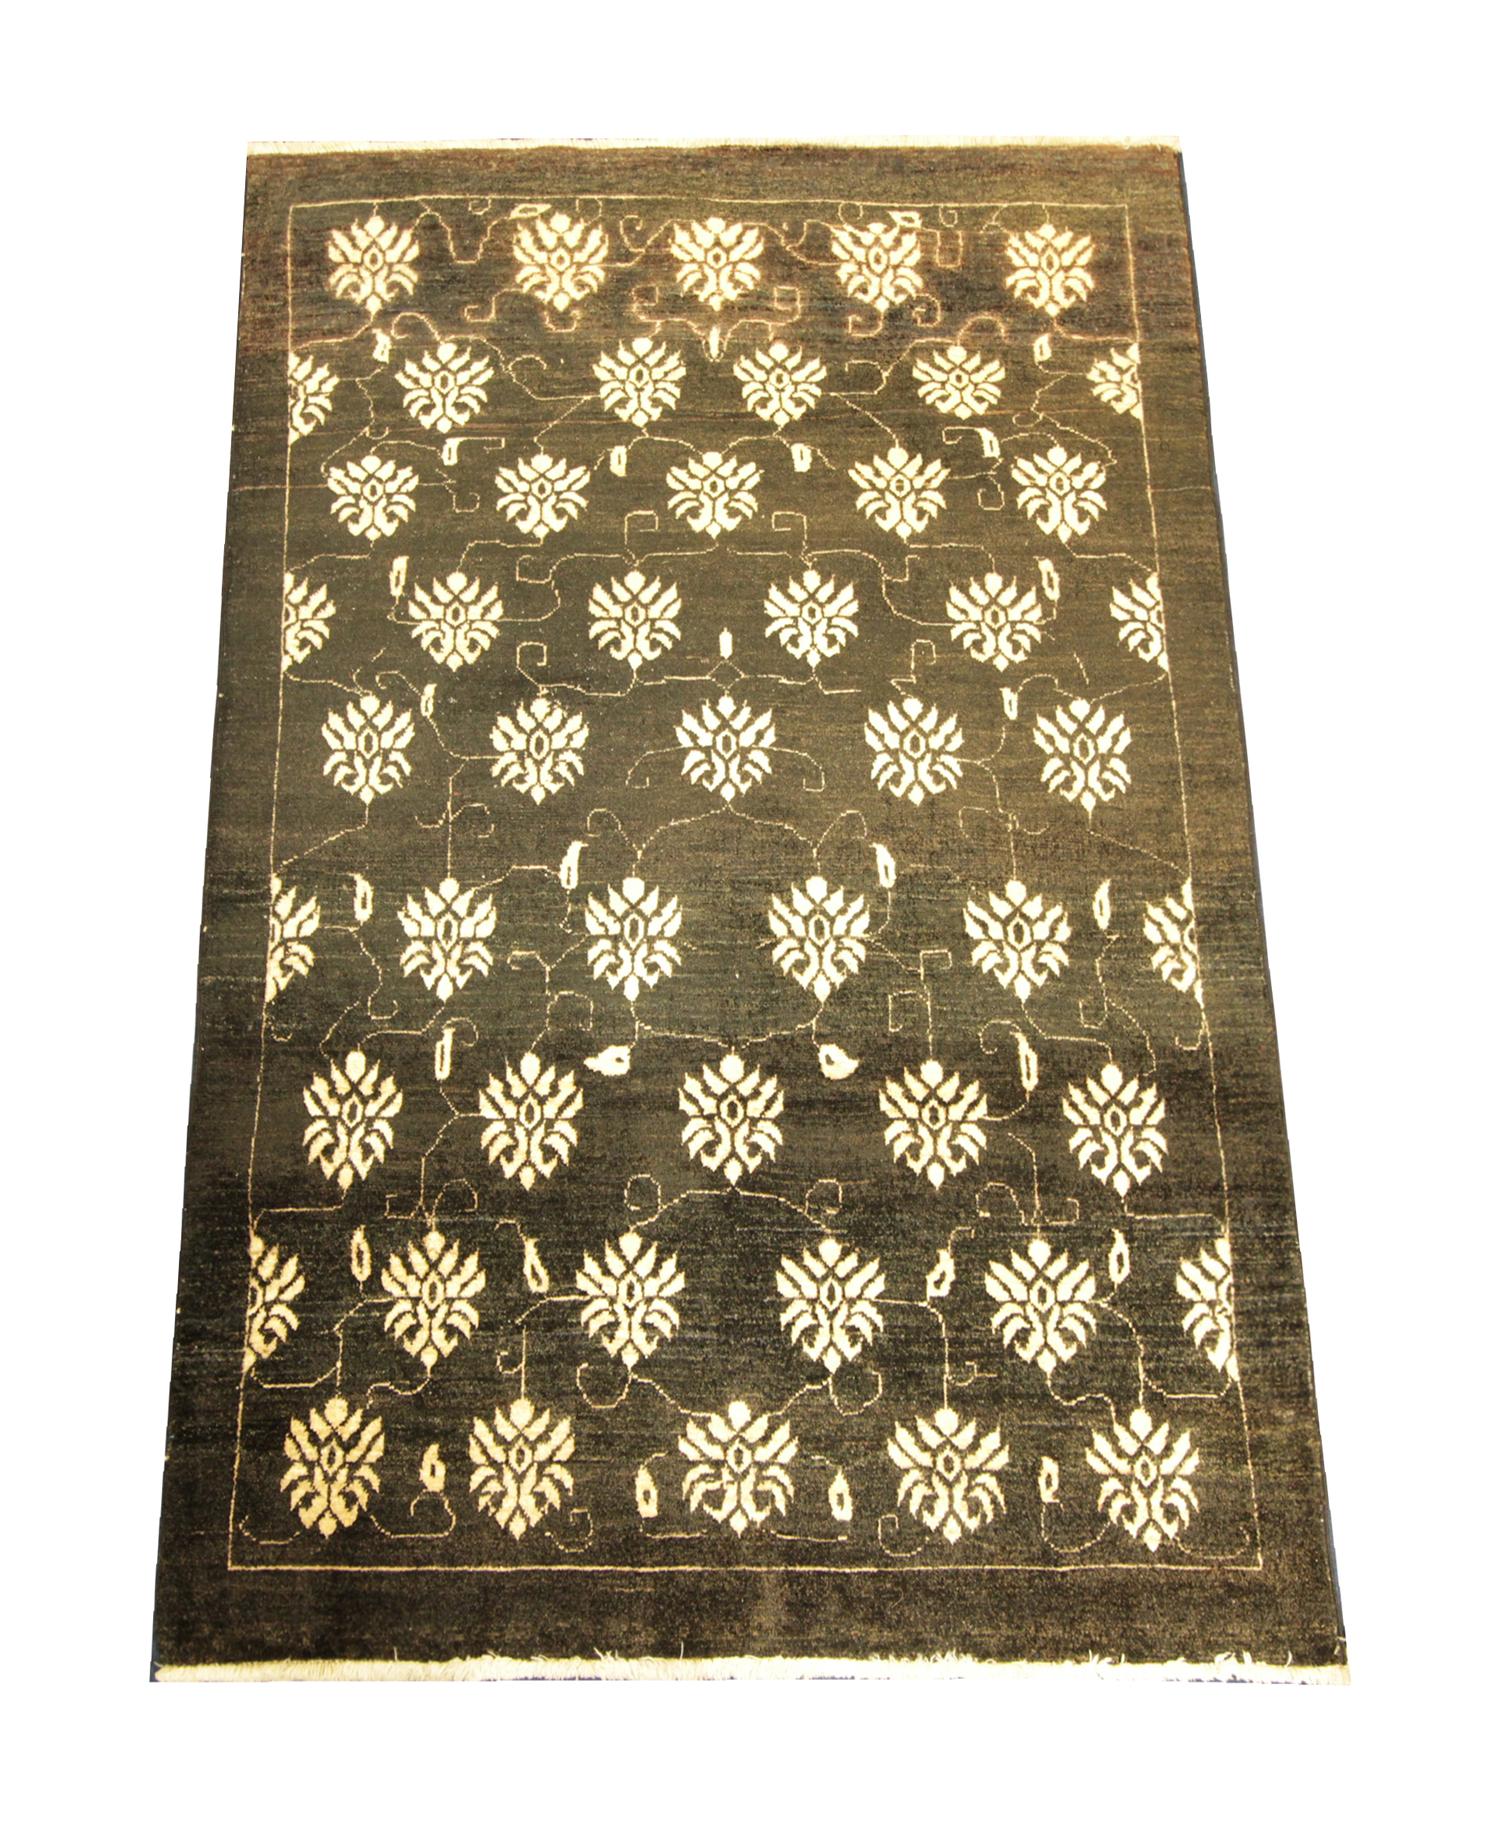 This fine wool Turkish rug was woven with the finest organic materials. The central design has been woven on a black background with an all-over floral pattern with a simple linear border woven in cream. The elegant design and sophisticated colour